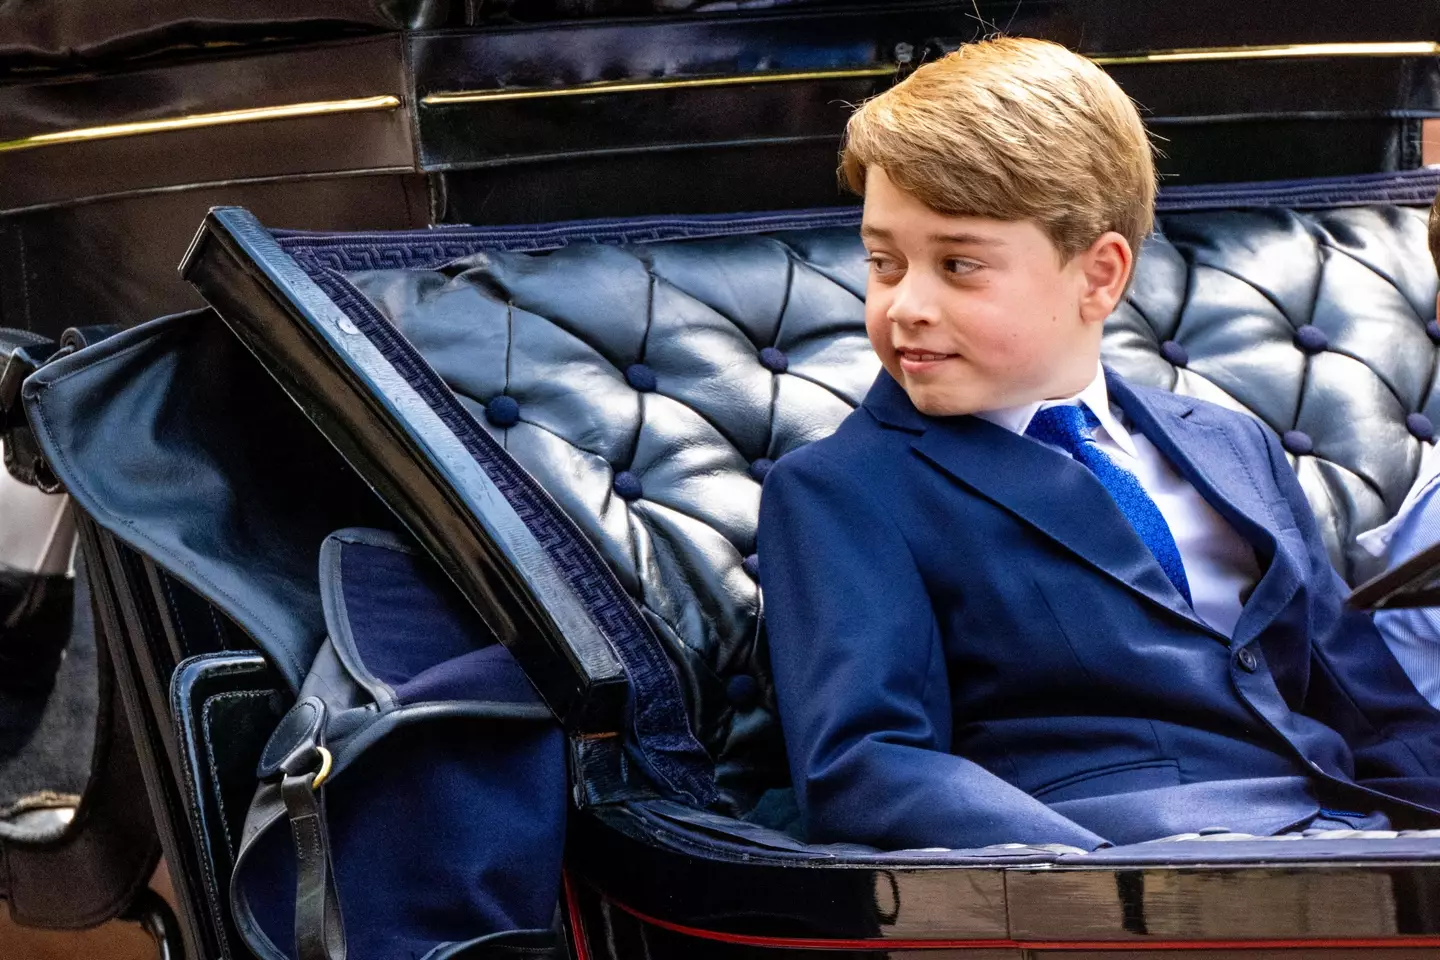 Prince George will be playing a key role in the Coronation.